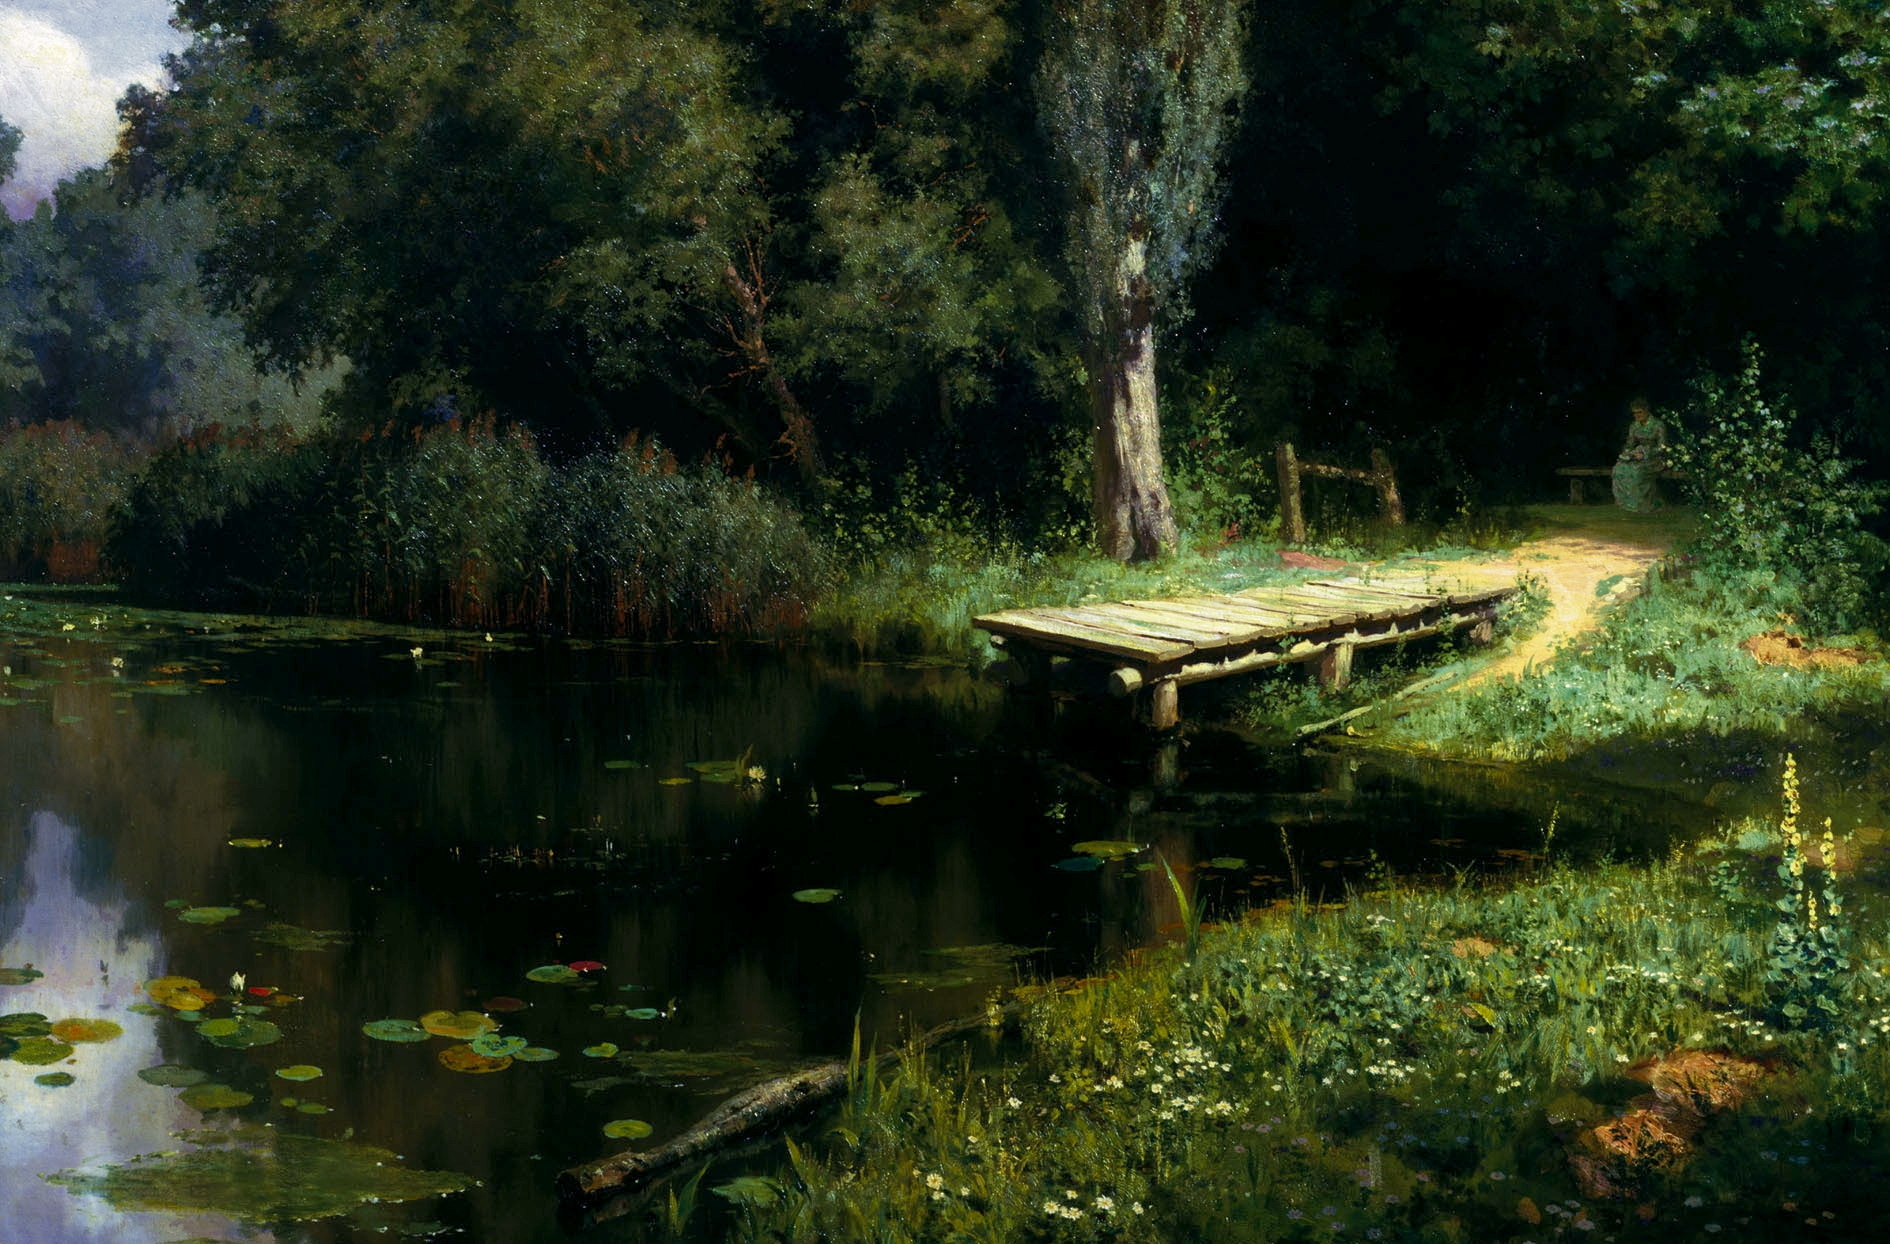 1920x1080 Background art, trees, nature, water lilies, lake, pier, painting, polenov, overgrown pond